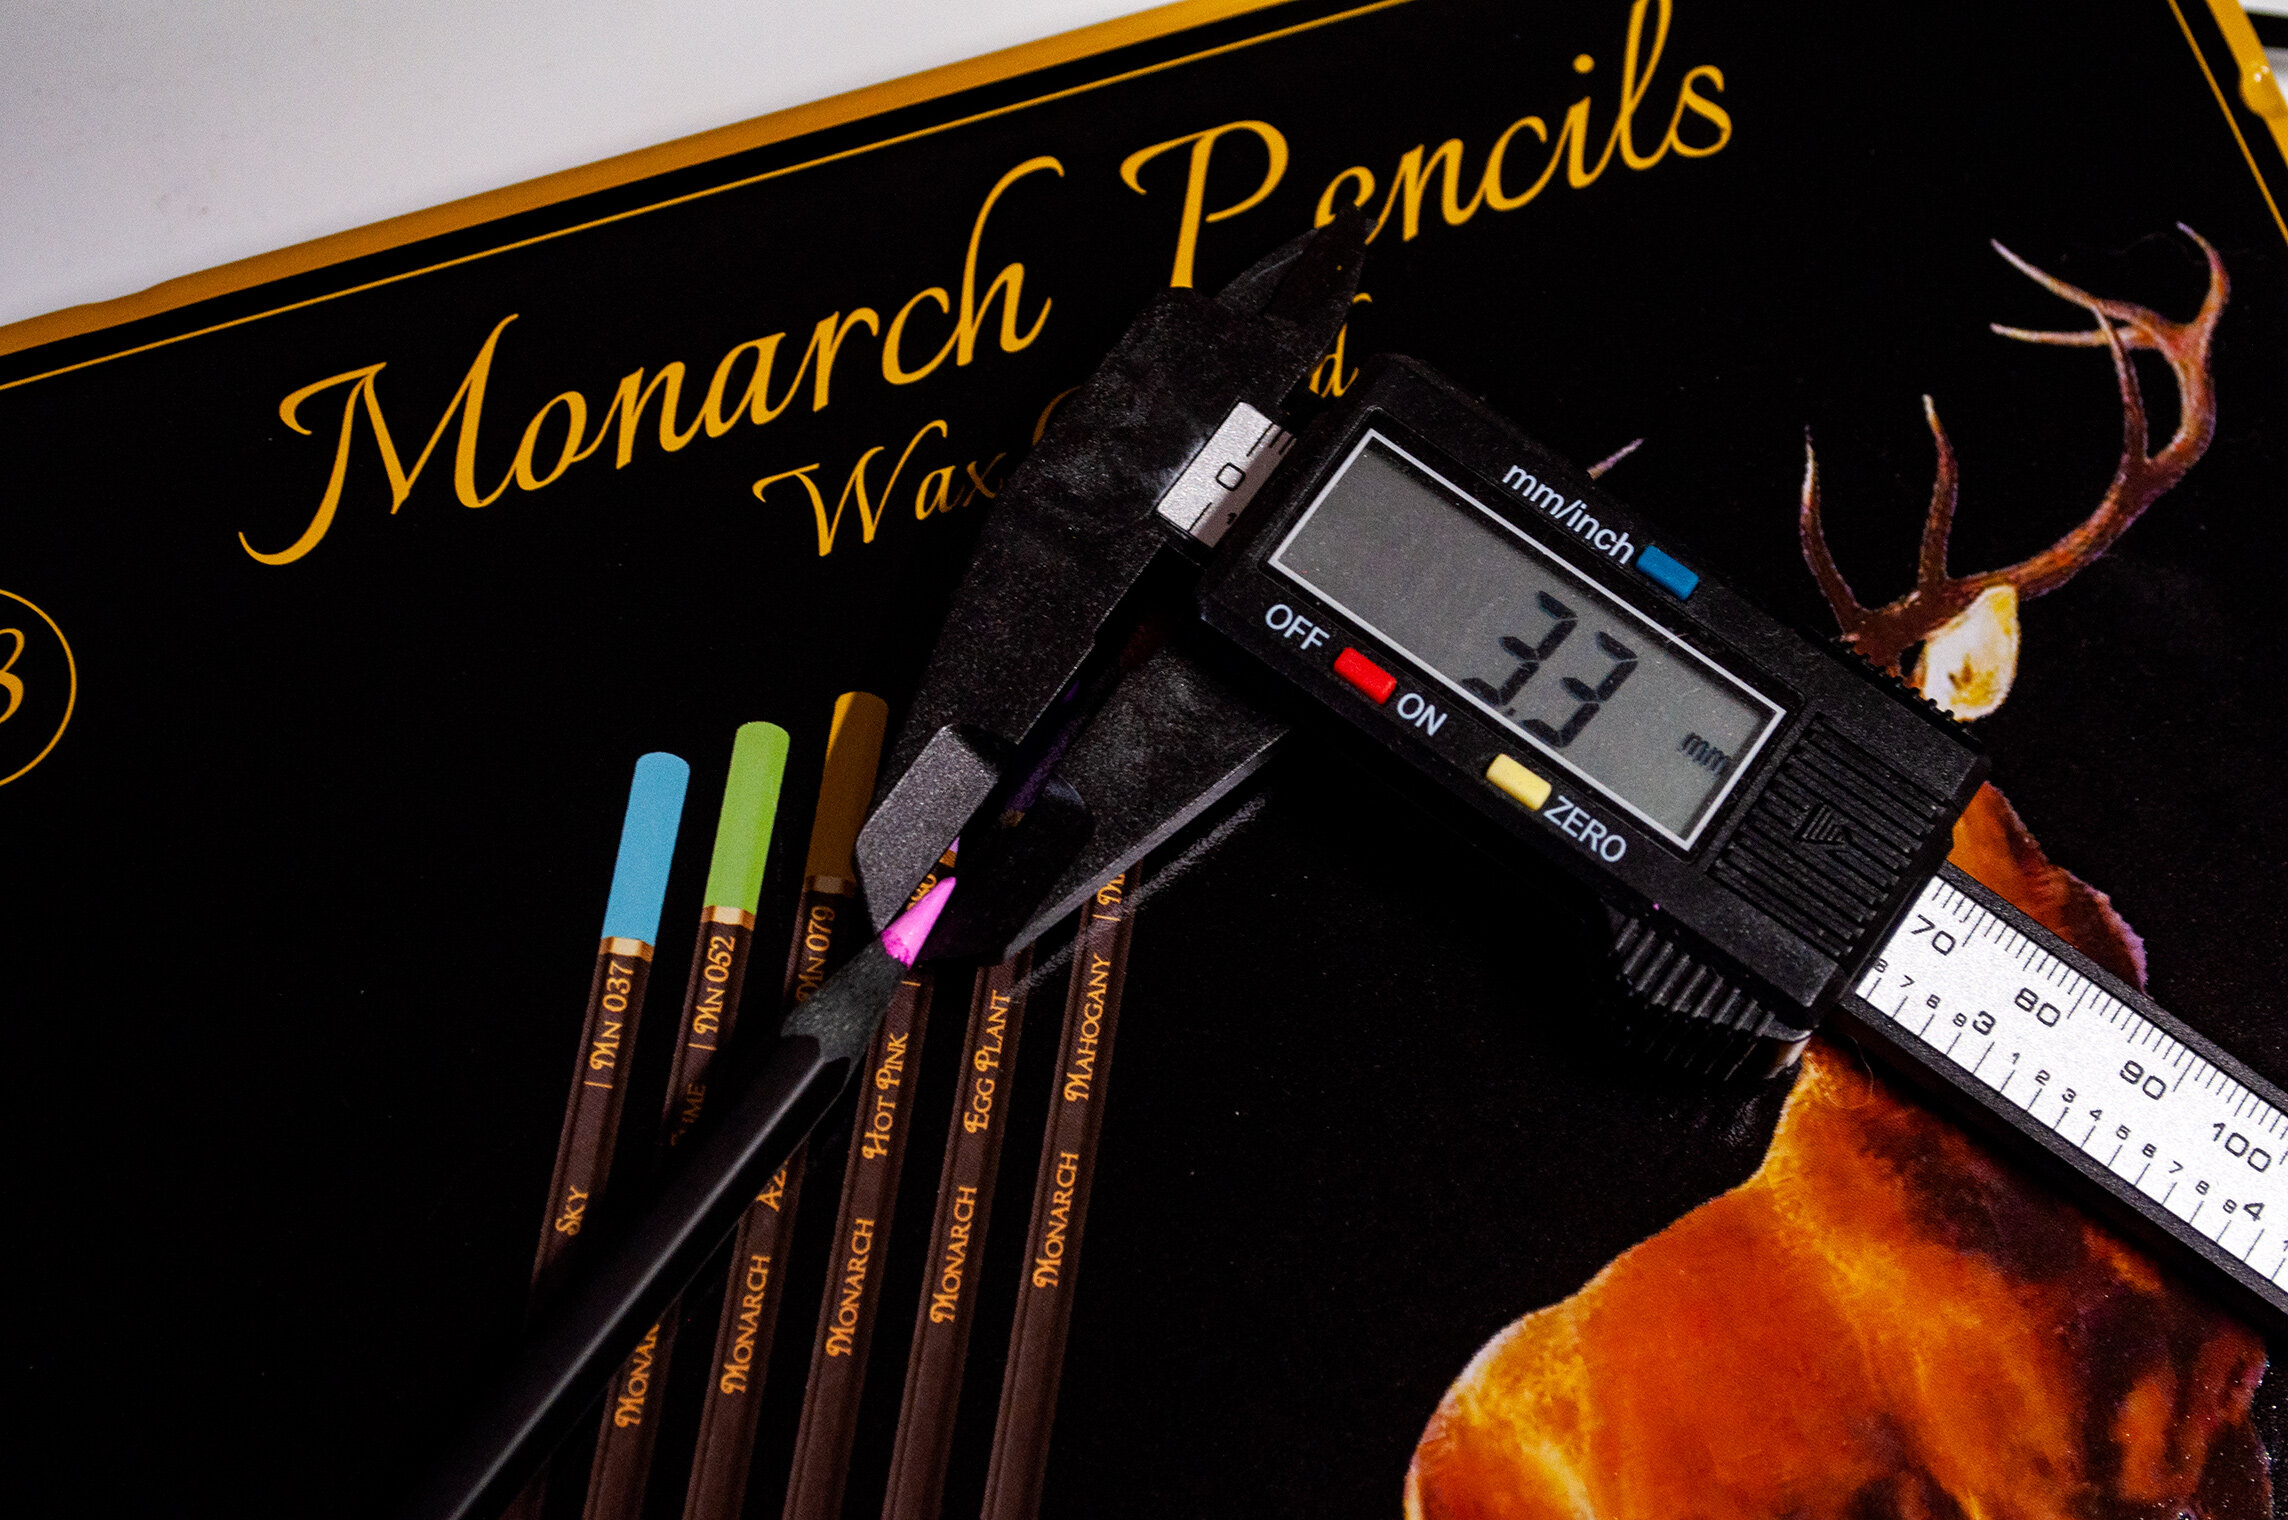 BLACK WIDOW MONARCH COLORED PENCILS, All 144 pencils BY COLOR FAMILY, LET'S SWATCH THEM TOGETHER 